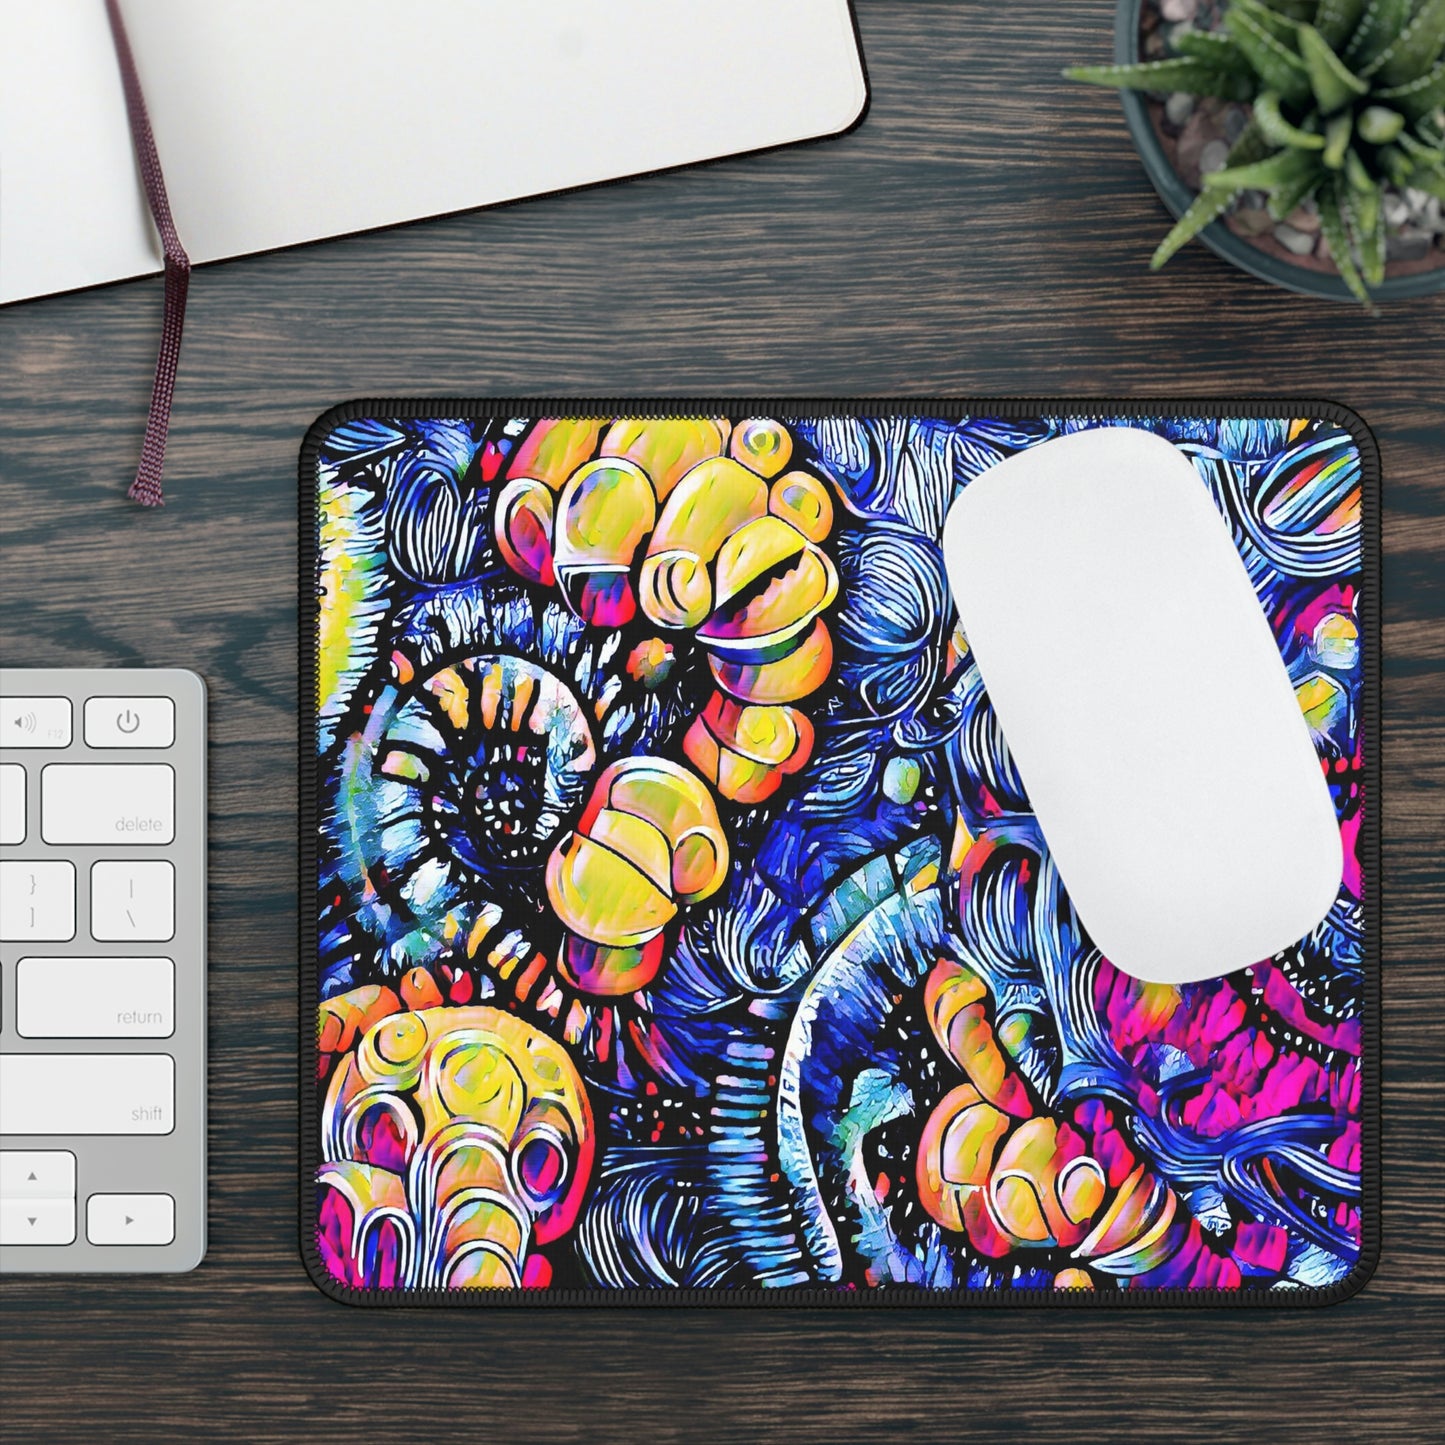 Psychedelic Time Spirals Large Mouse Pad